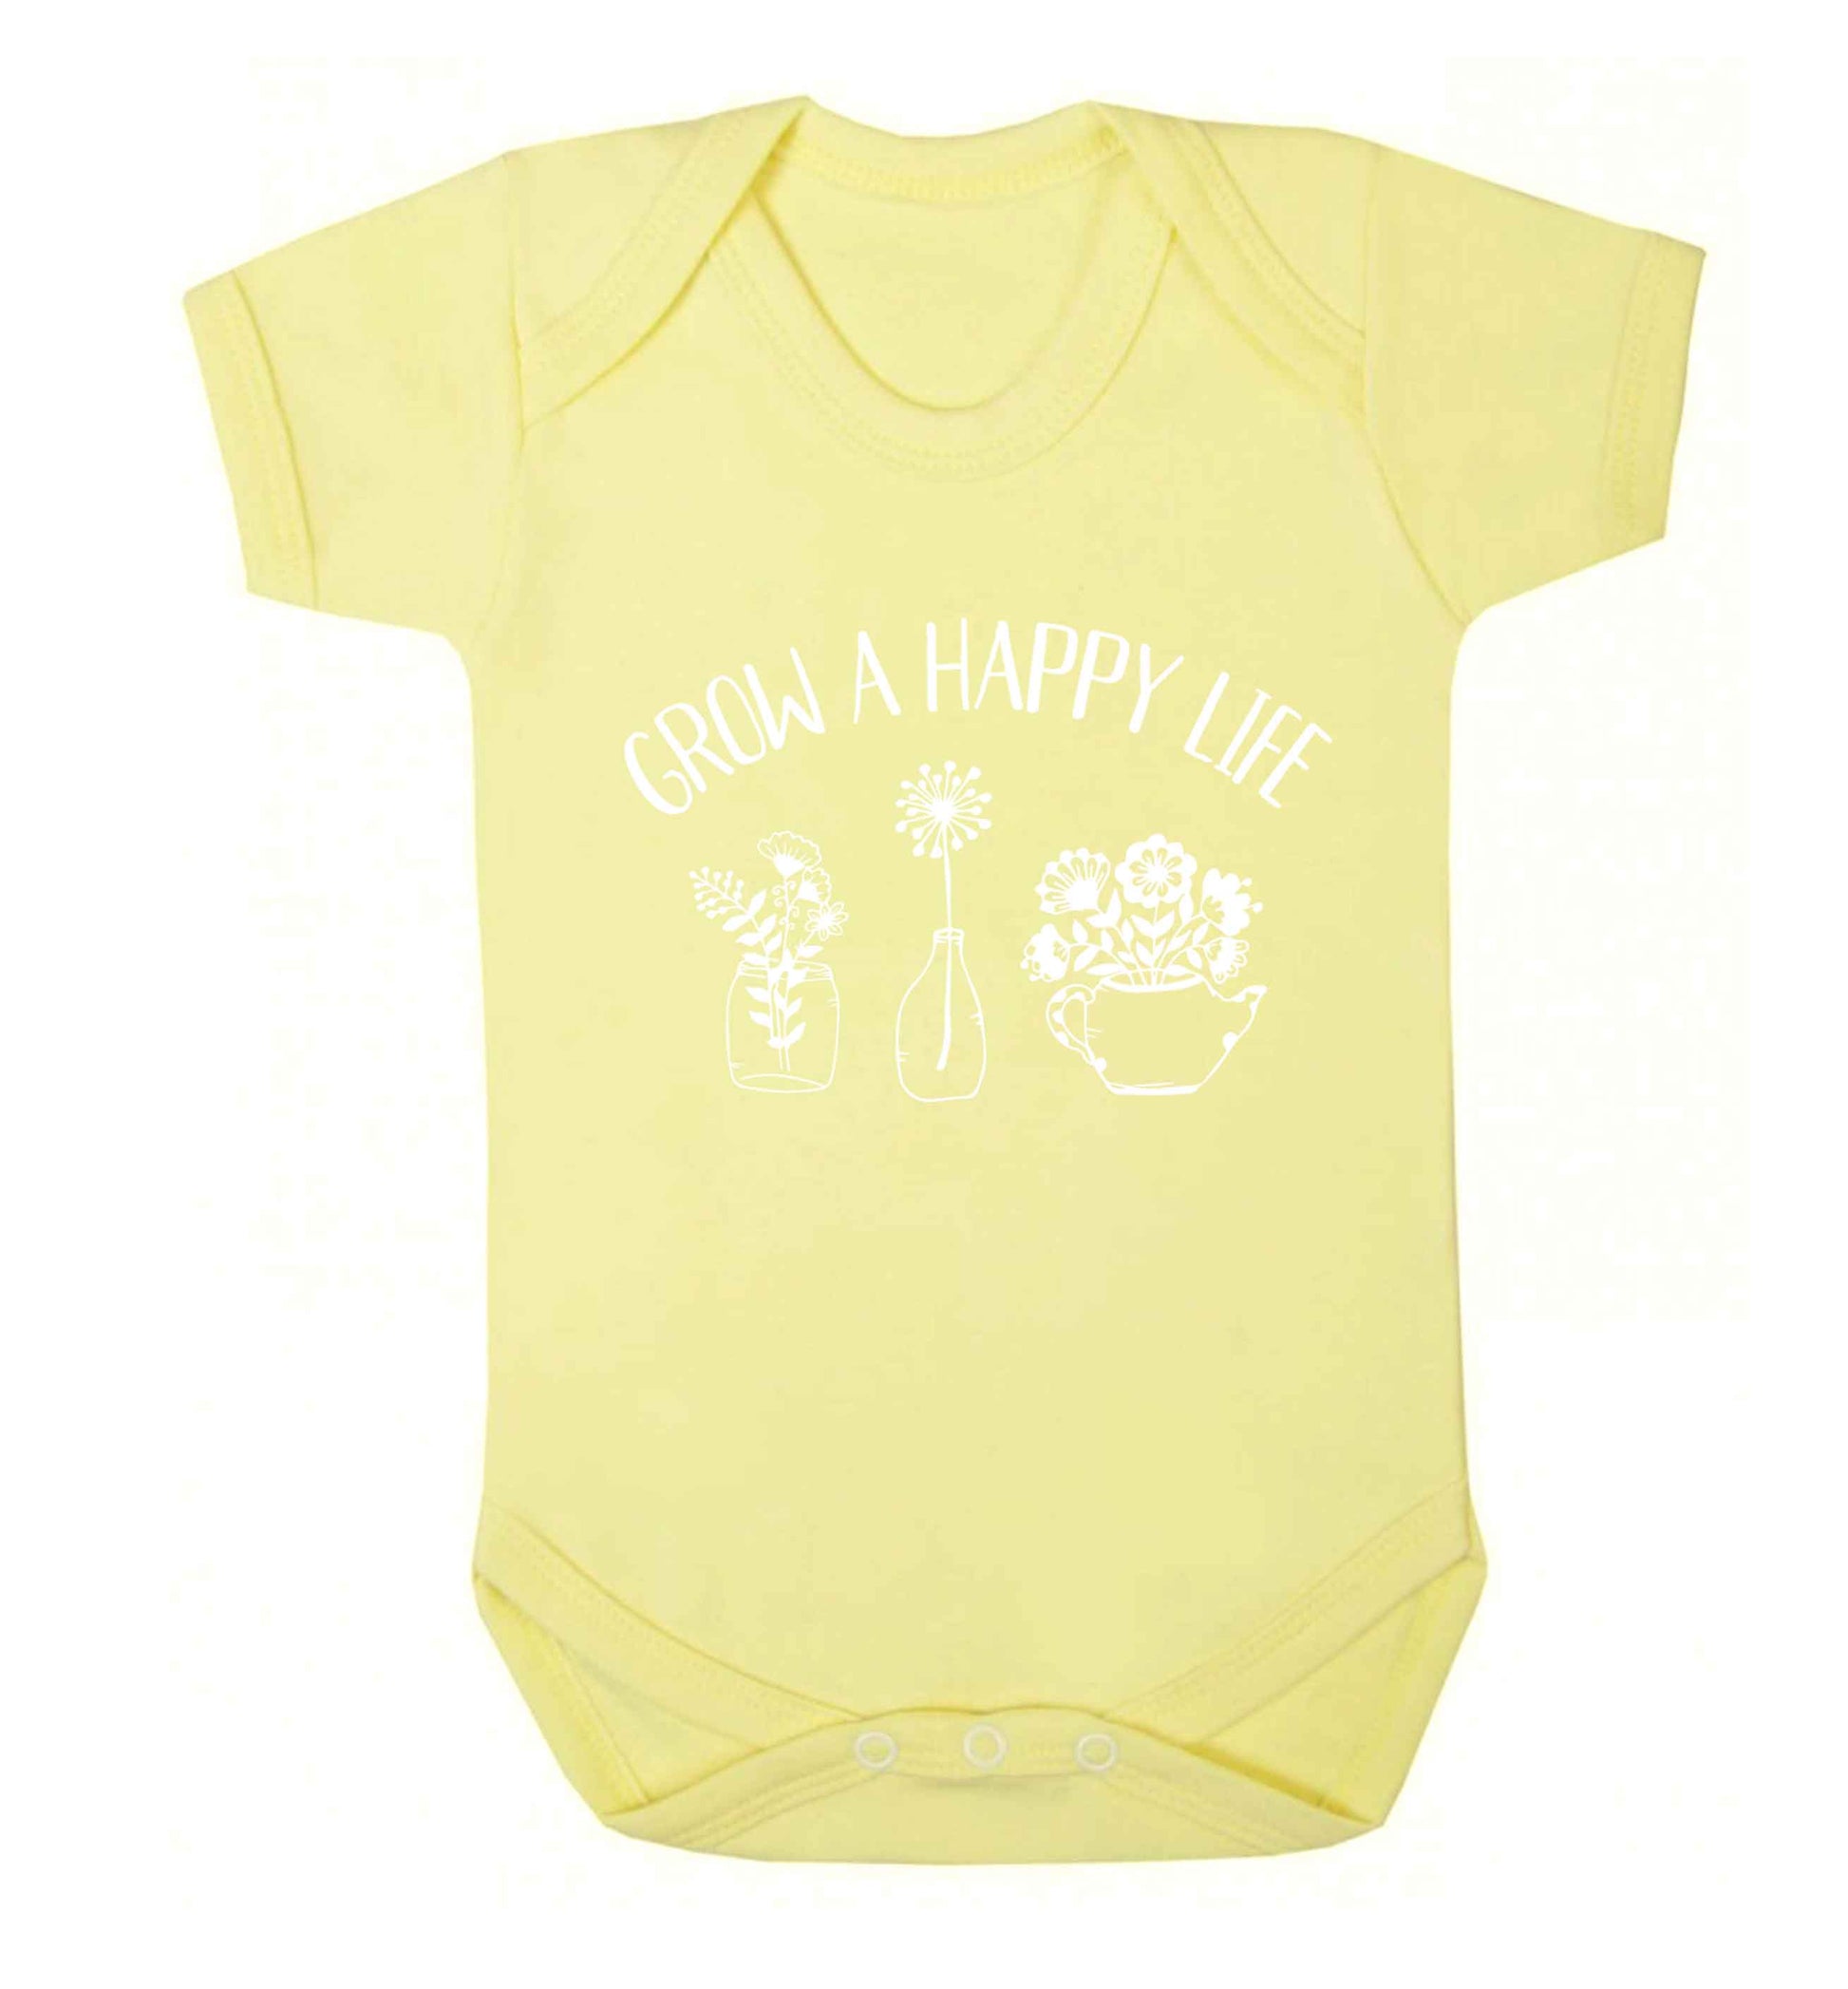 Grow a happy life Baby Vest pale yellow 18-24 months